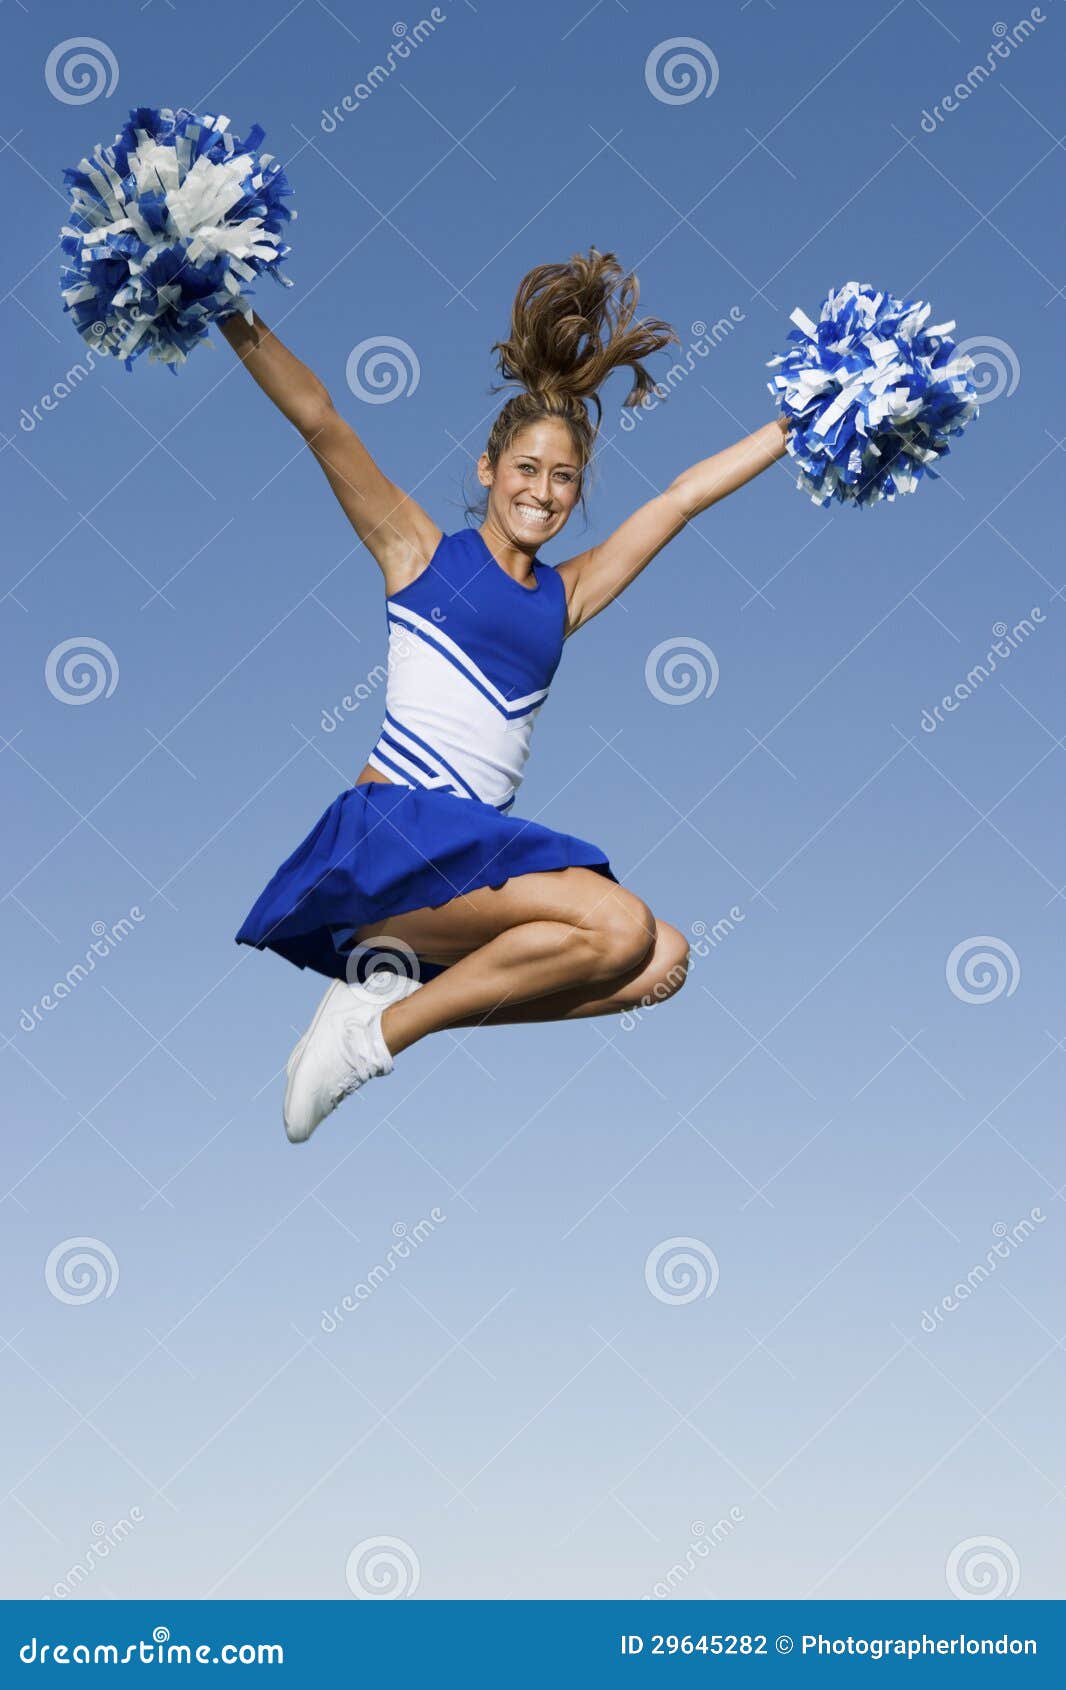 Cheerleader Jumping with Pom-Poms Stock Photo - Image of energy